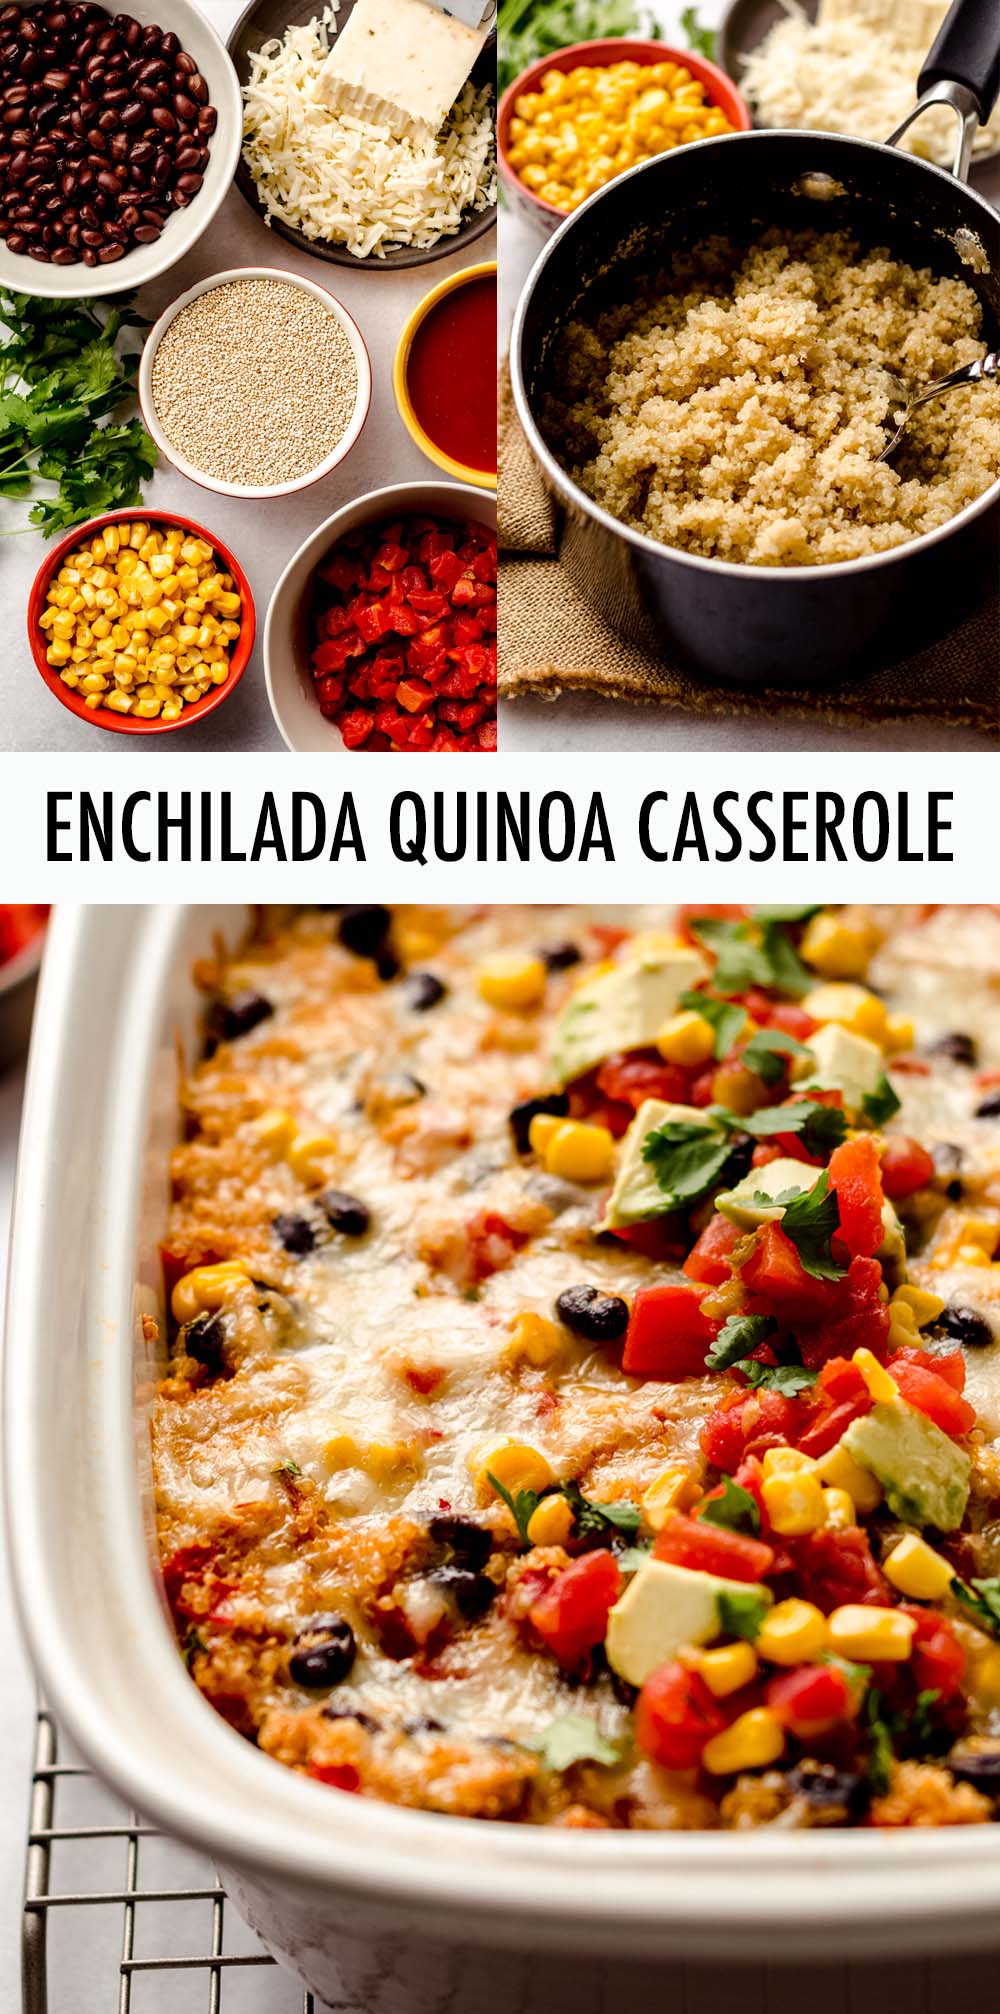 A quick and easy gluten free enchilada casserole full of spices, cheese, and nutrient-rich quinoa. via @frshaprilflours